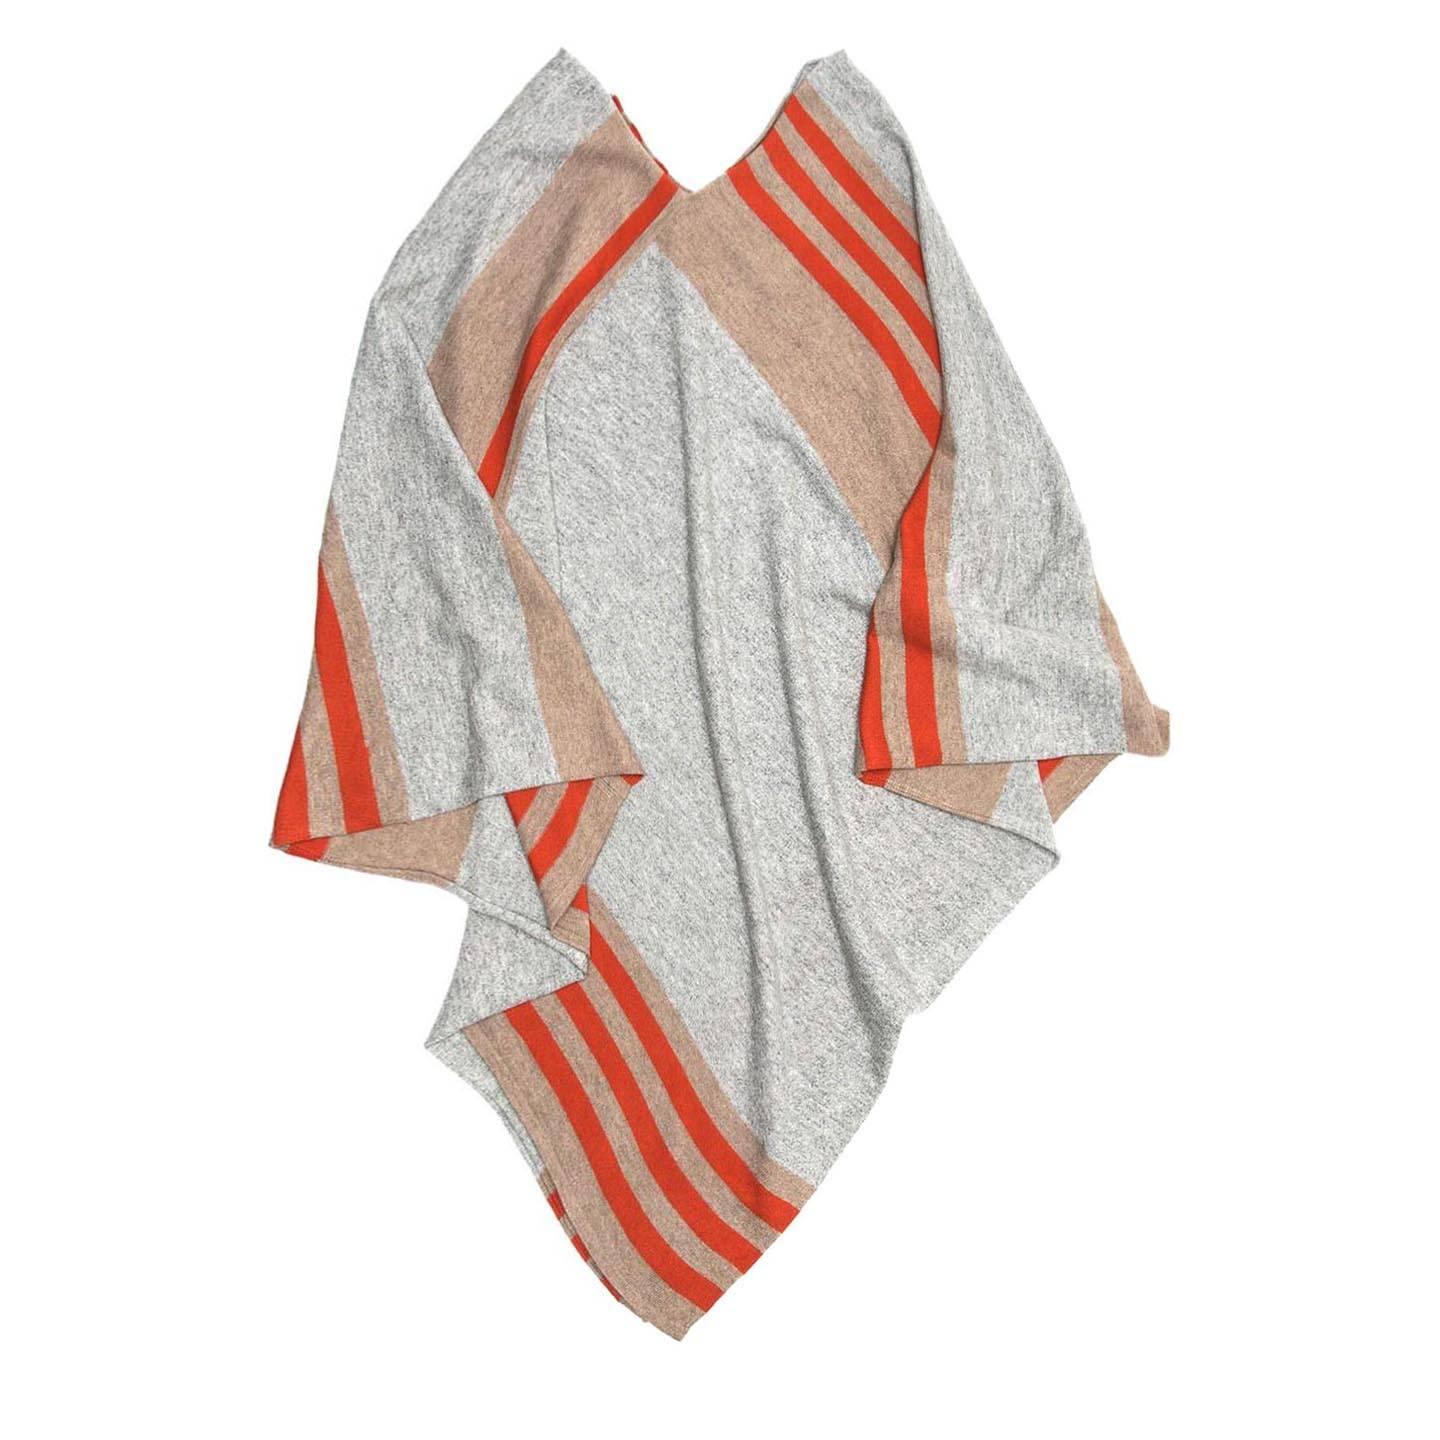 Grey cashmere knitted poncho with orange and khaki stripes. It is a constant design piece by Tomas Maier and this in particular was in his first collection. Made in Italy.

Size  One size

Condition  Excellent: worn once